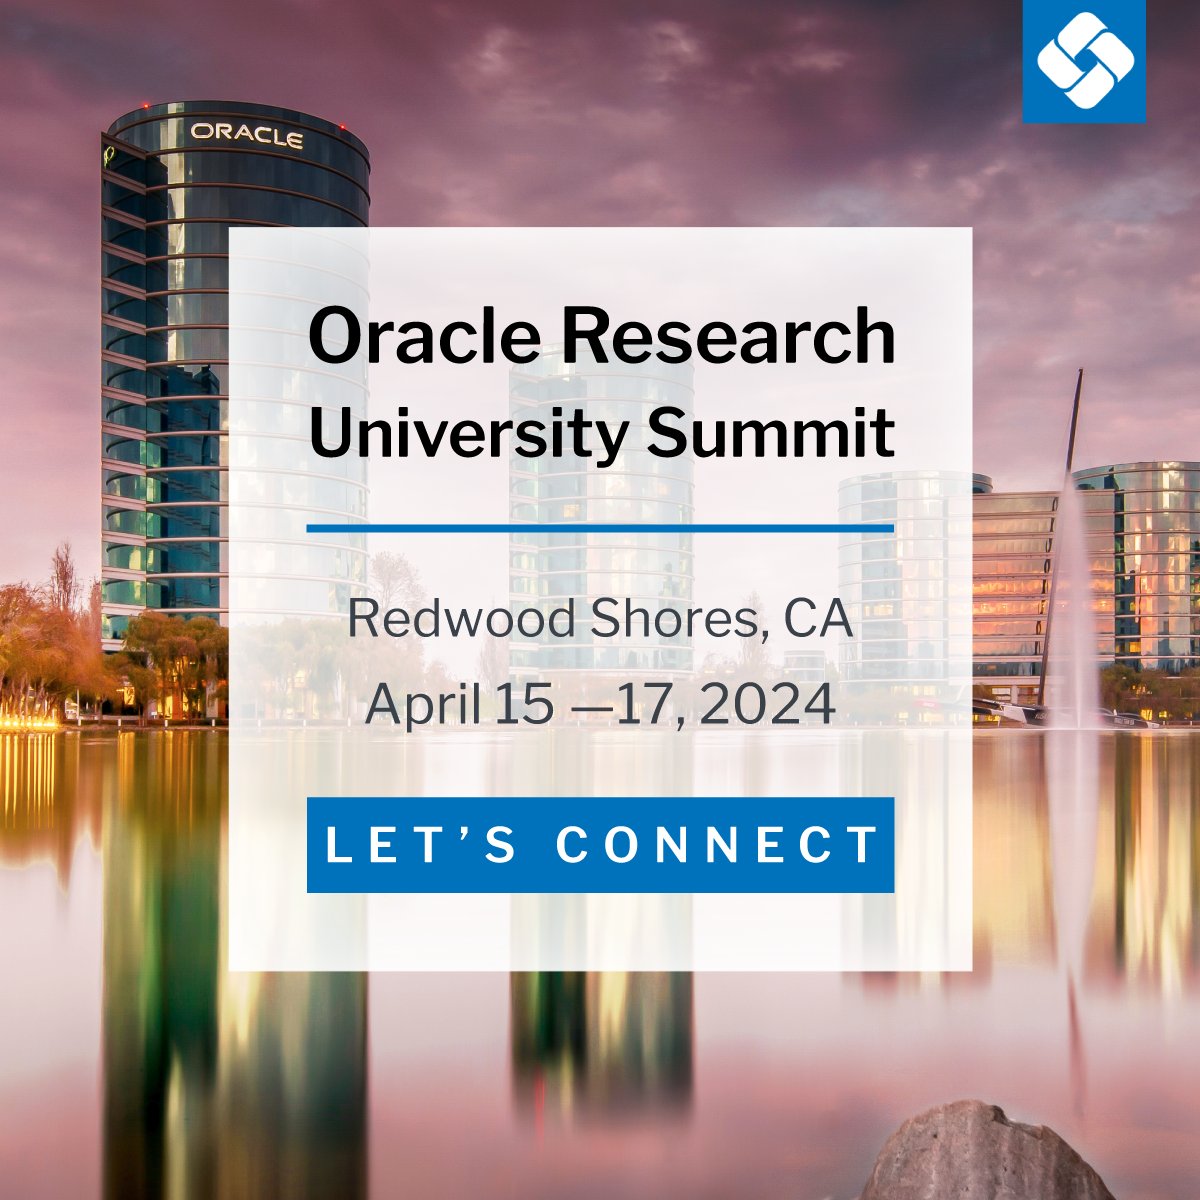 Proud to be a sponsor of the Oracle Research University Summit! The Summit offers a unique opportunity for attendees to network with peer universities, engage directly with #Oracle product teams, and hear from thought leaders shaping the future of #highered.

#oraclepartner